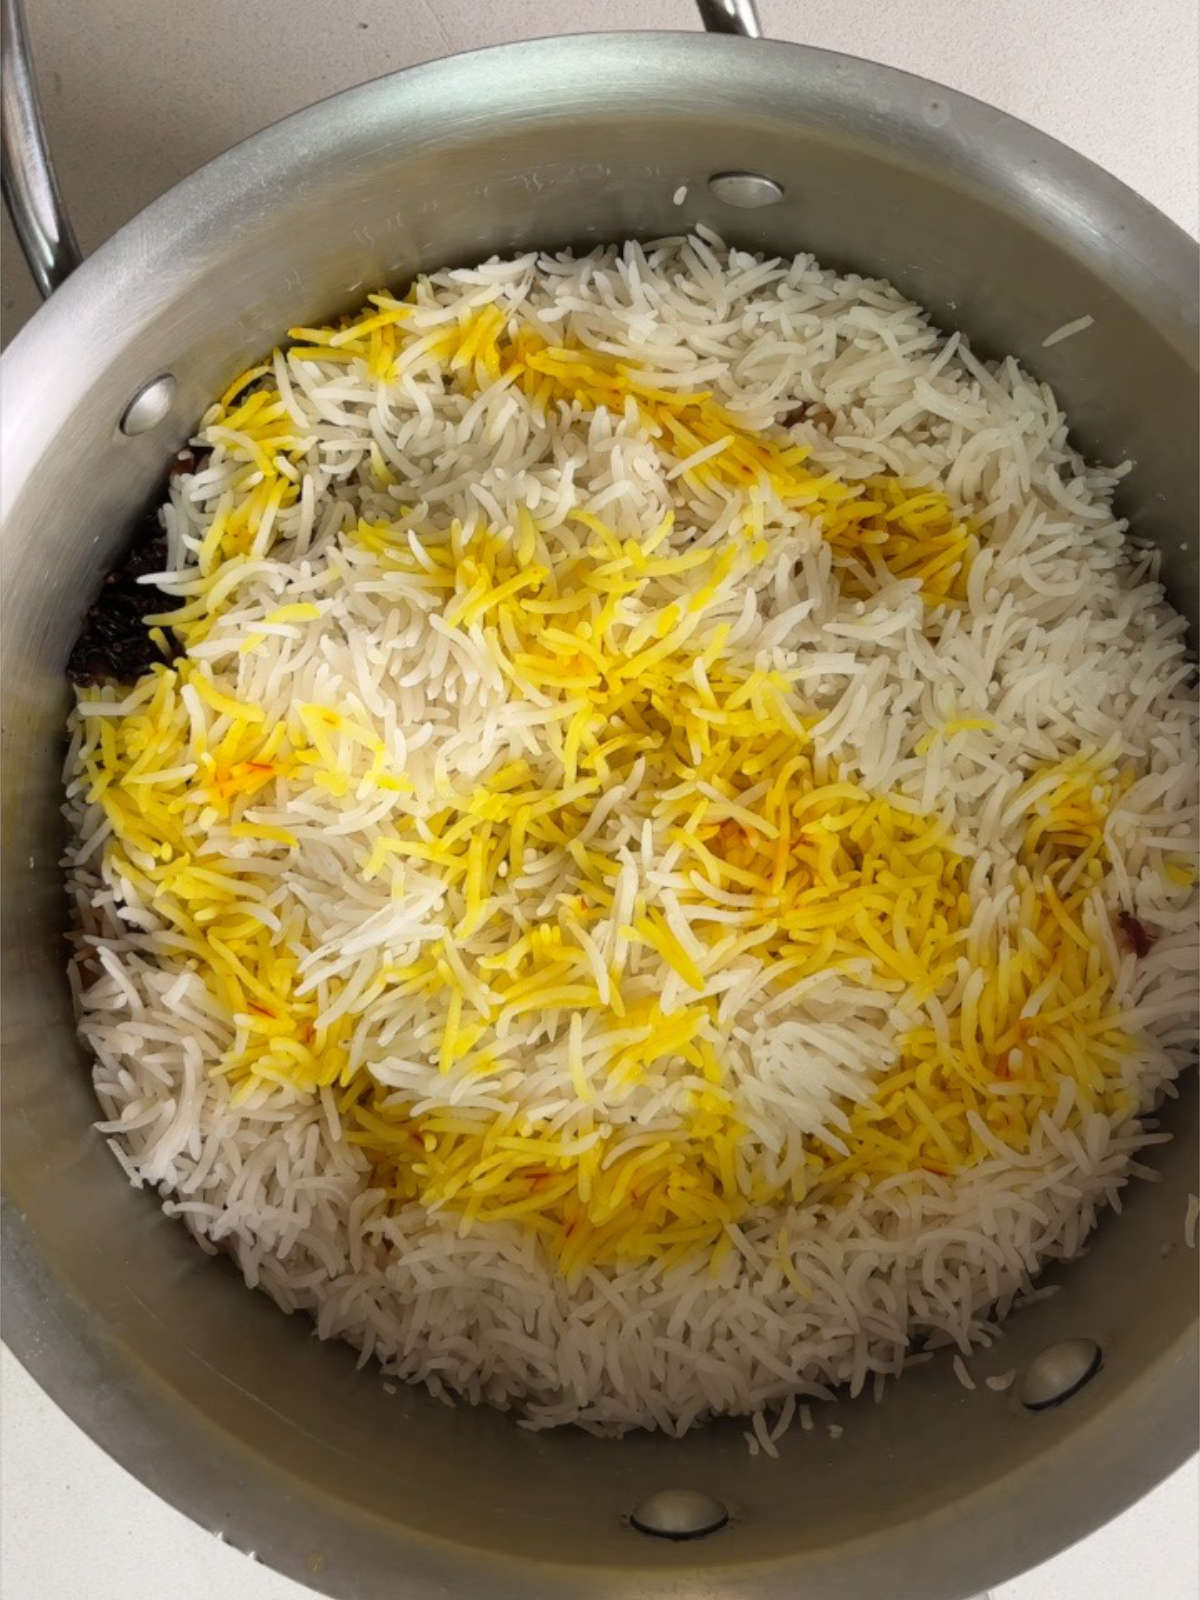 Rice in a pot with some saffron making it both yellow and white.